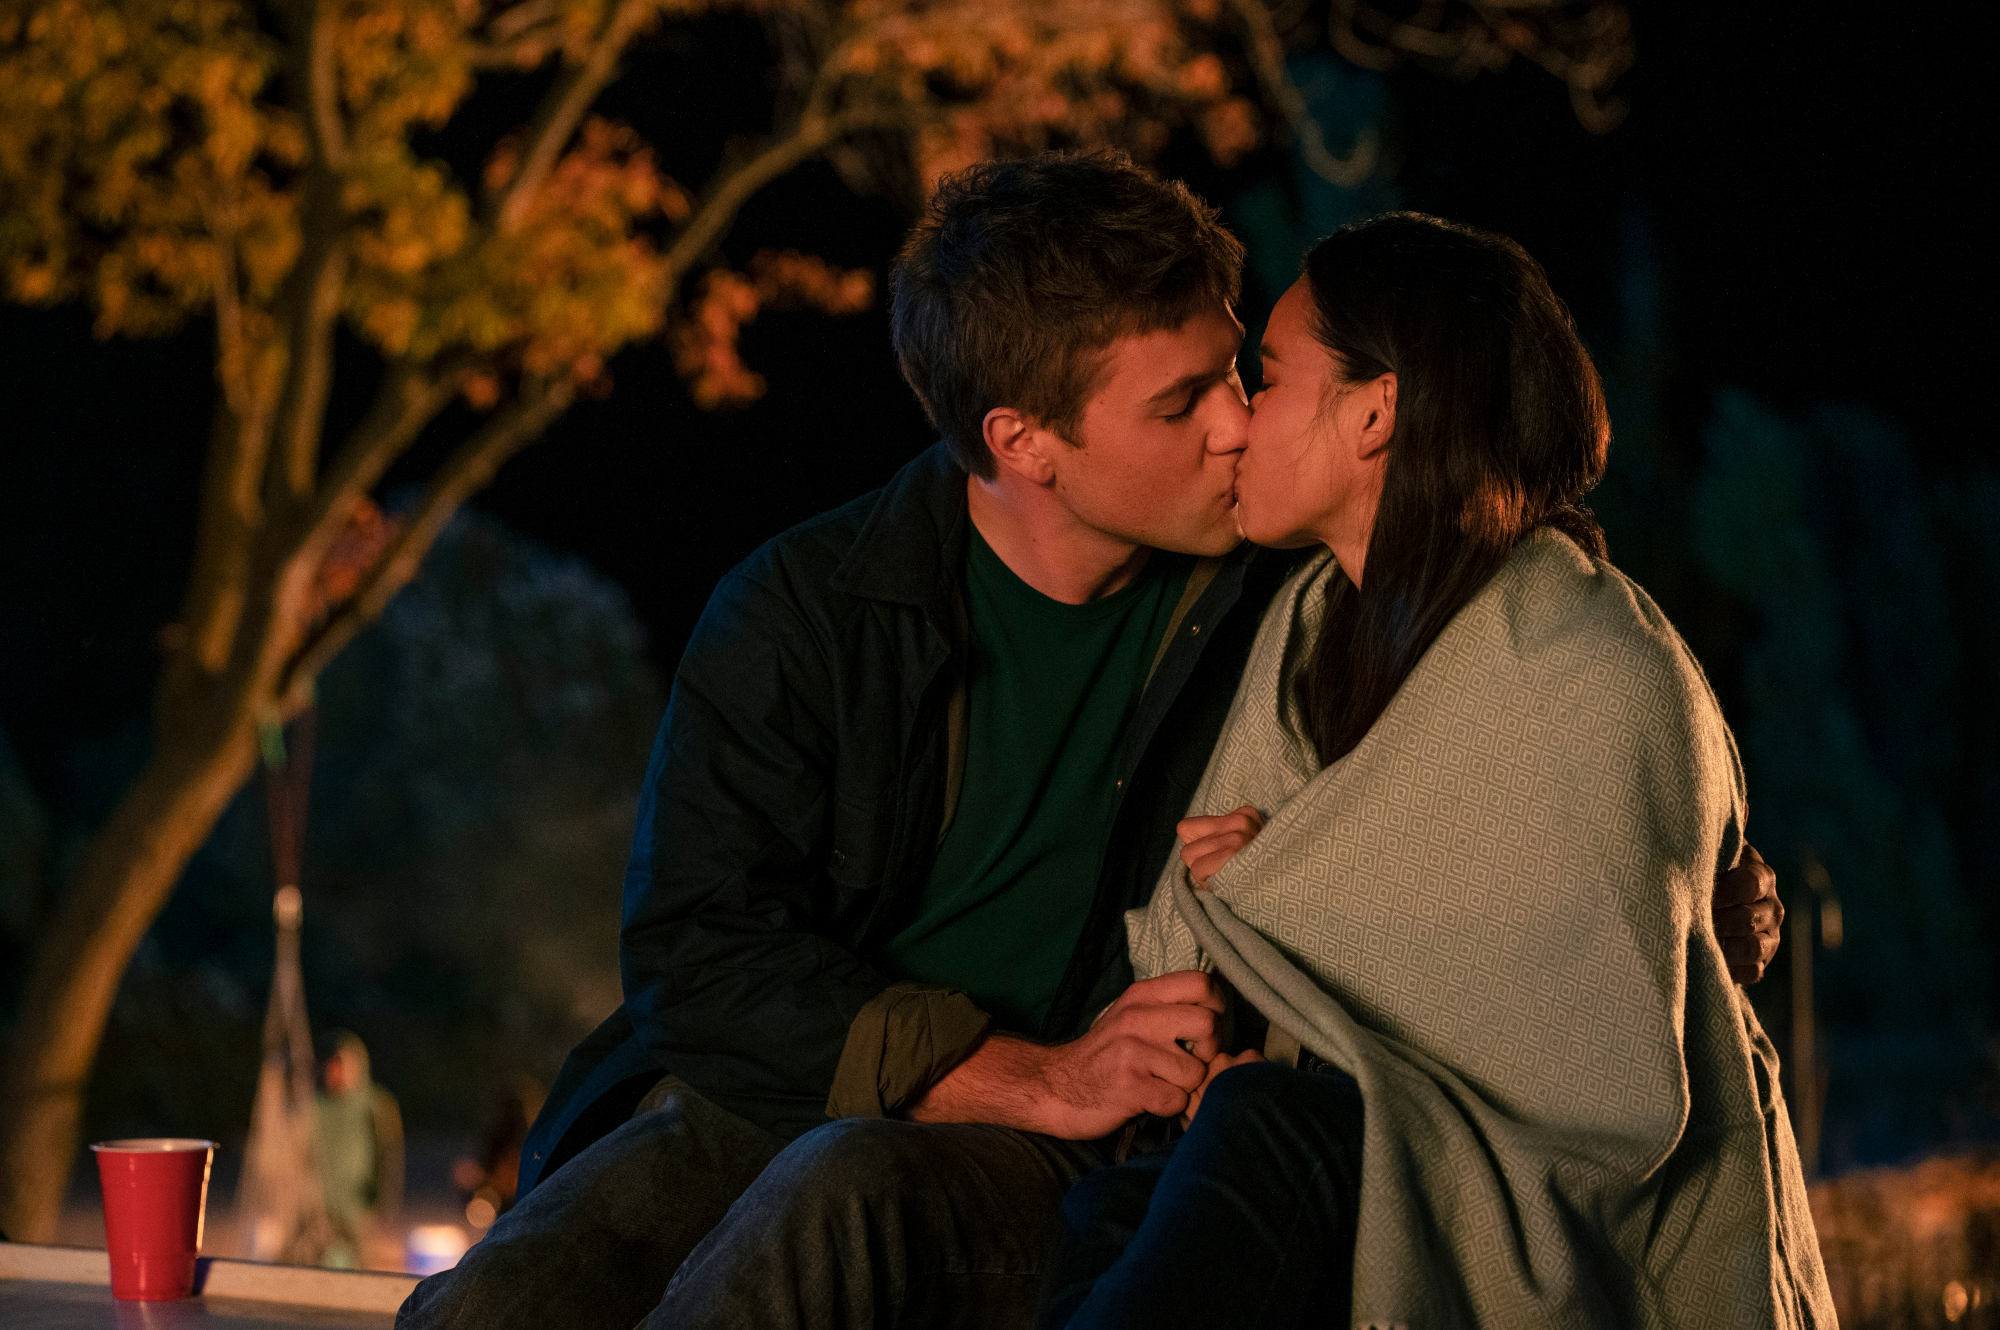 Connor Jessup and Genevieve Kang as Tyler Locke and Jackie Veda in 'Locke & Key' Season 2. They're sitting down and kissing.